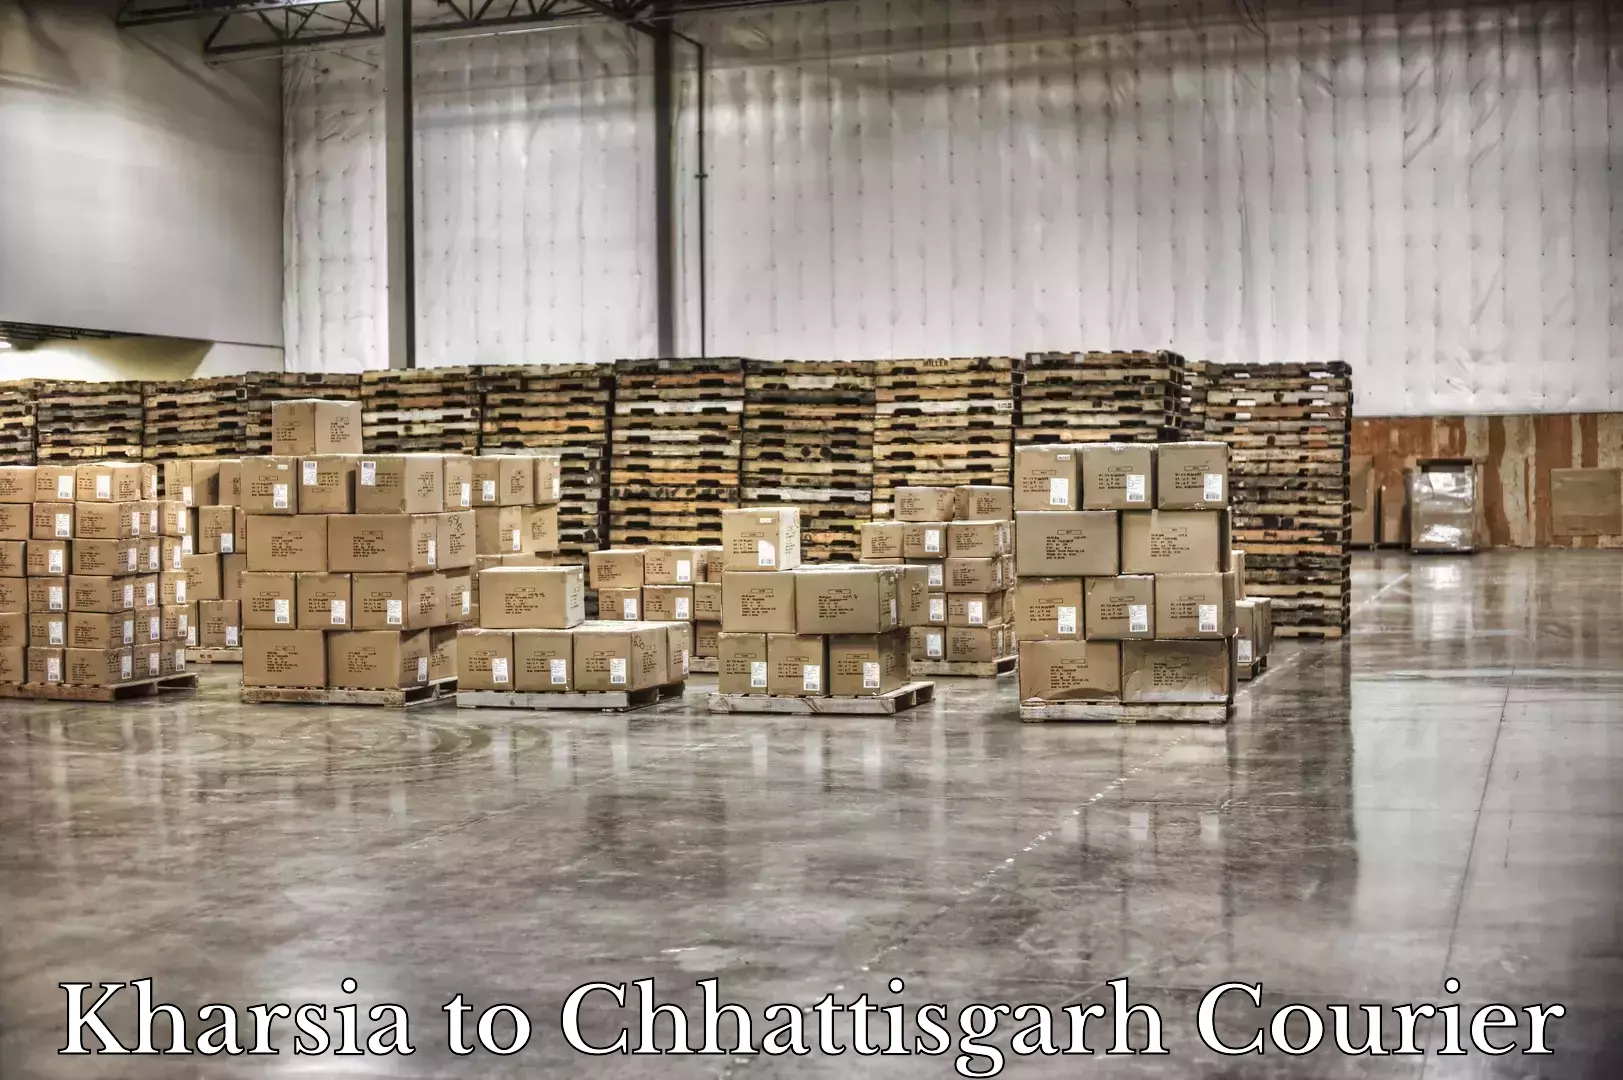 Baggage shipping schedule Kharsia to Kharsia